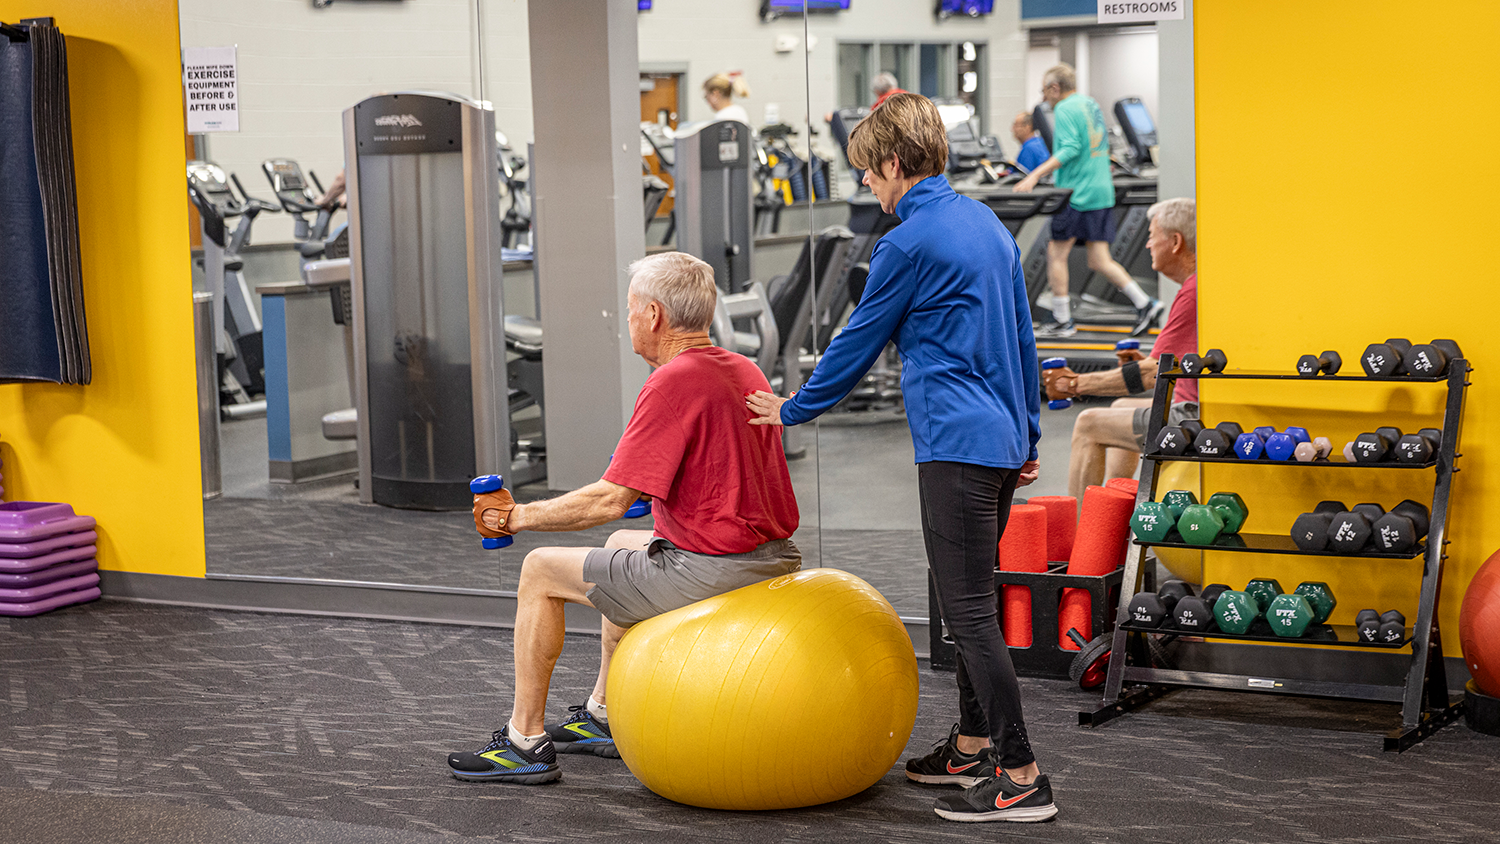 A man lifts weights while seated on a yoga ball at the fitness center. A friend supports behind him.